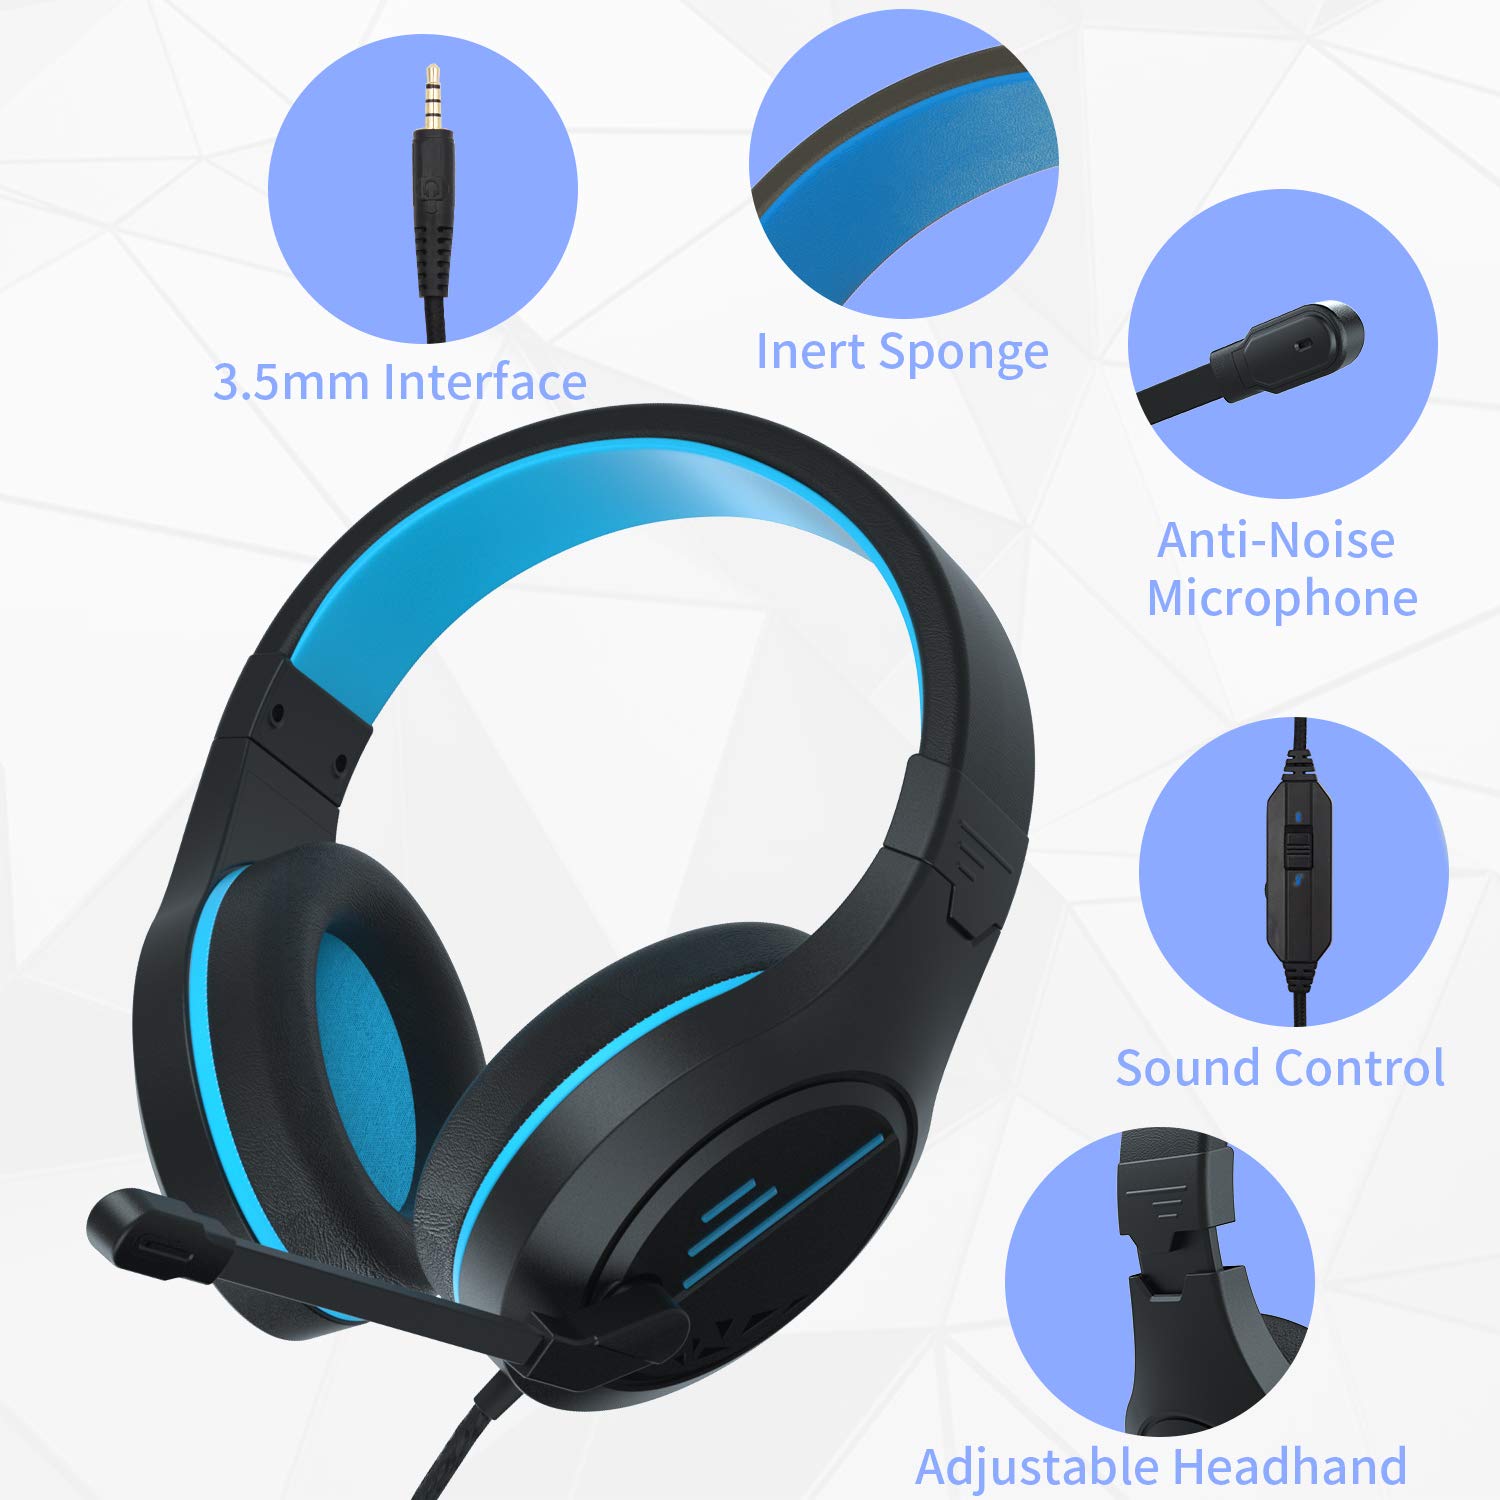 Anivia MH601 Gaming Headset for PC PS5 PS4 Nintendo Xbox One Mac Laptop, Wired Stereo Over-Ear Headphones with Noise Cancelling Mic, Soft Memory Earmuffs for Adults & Kids, Blue